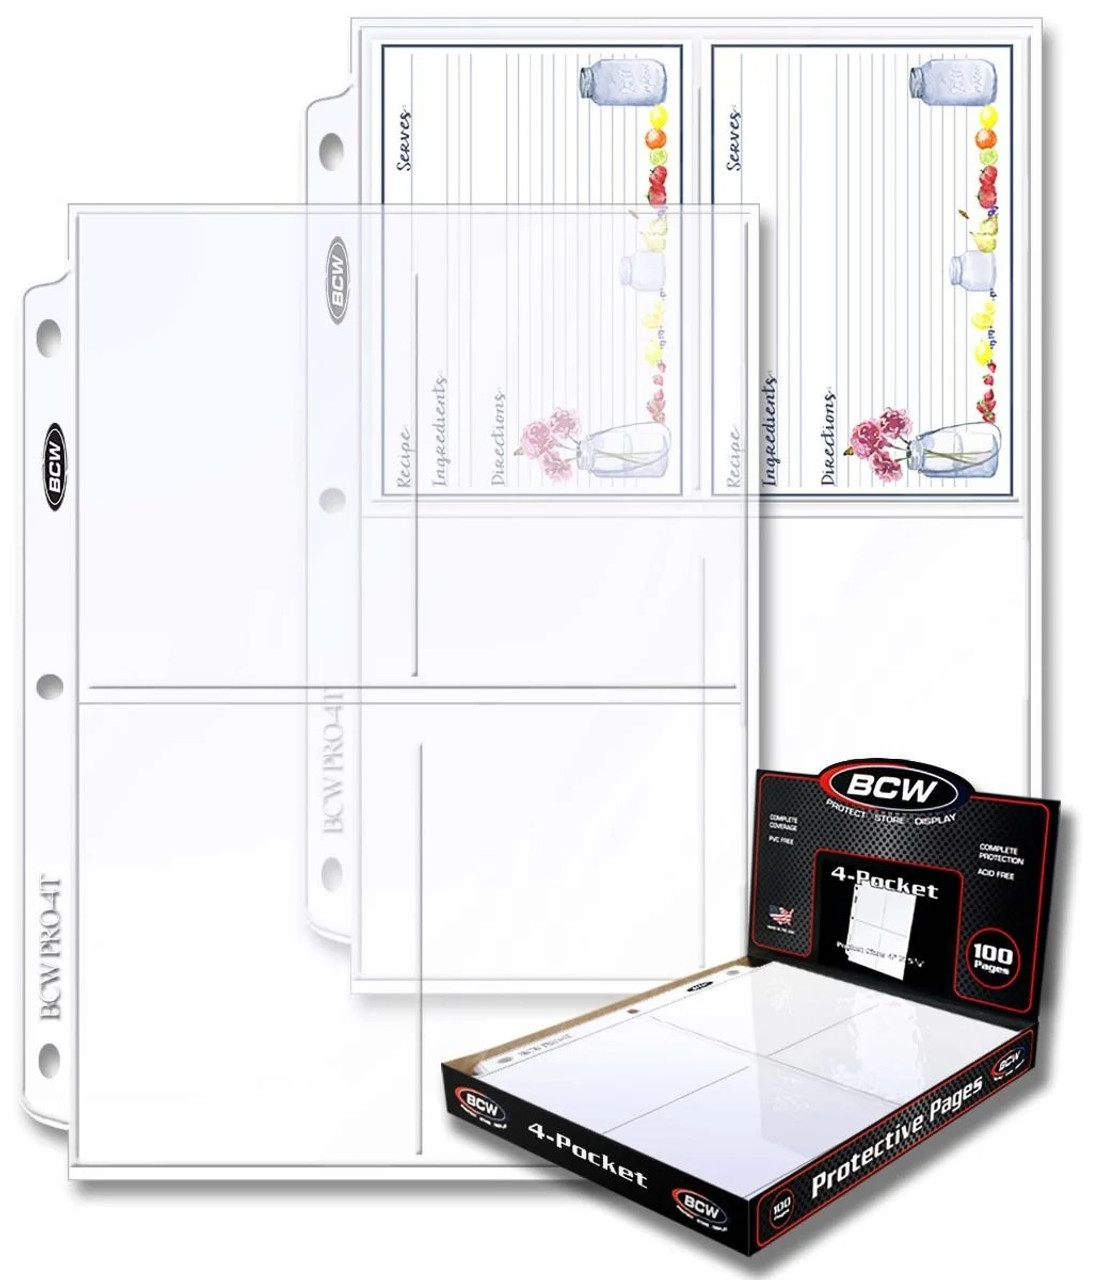 BCW Pro 4-Pocket Pages 100ct Box